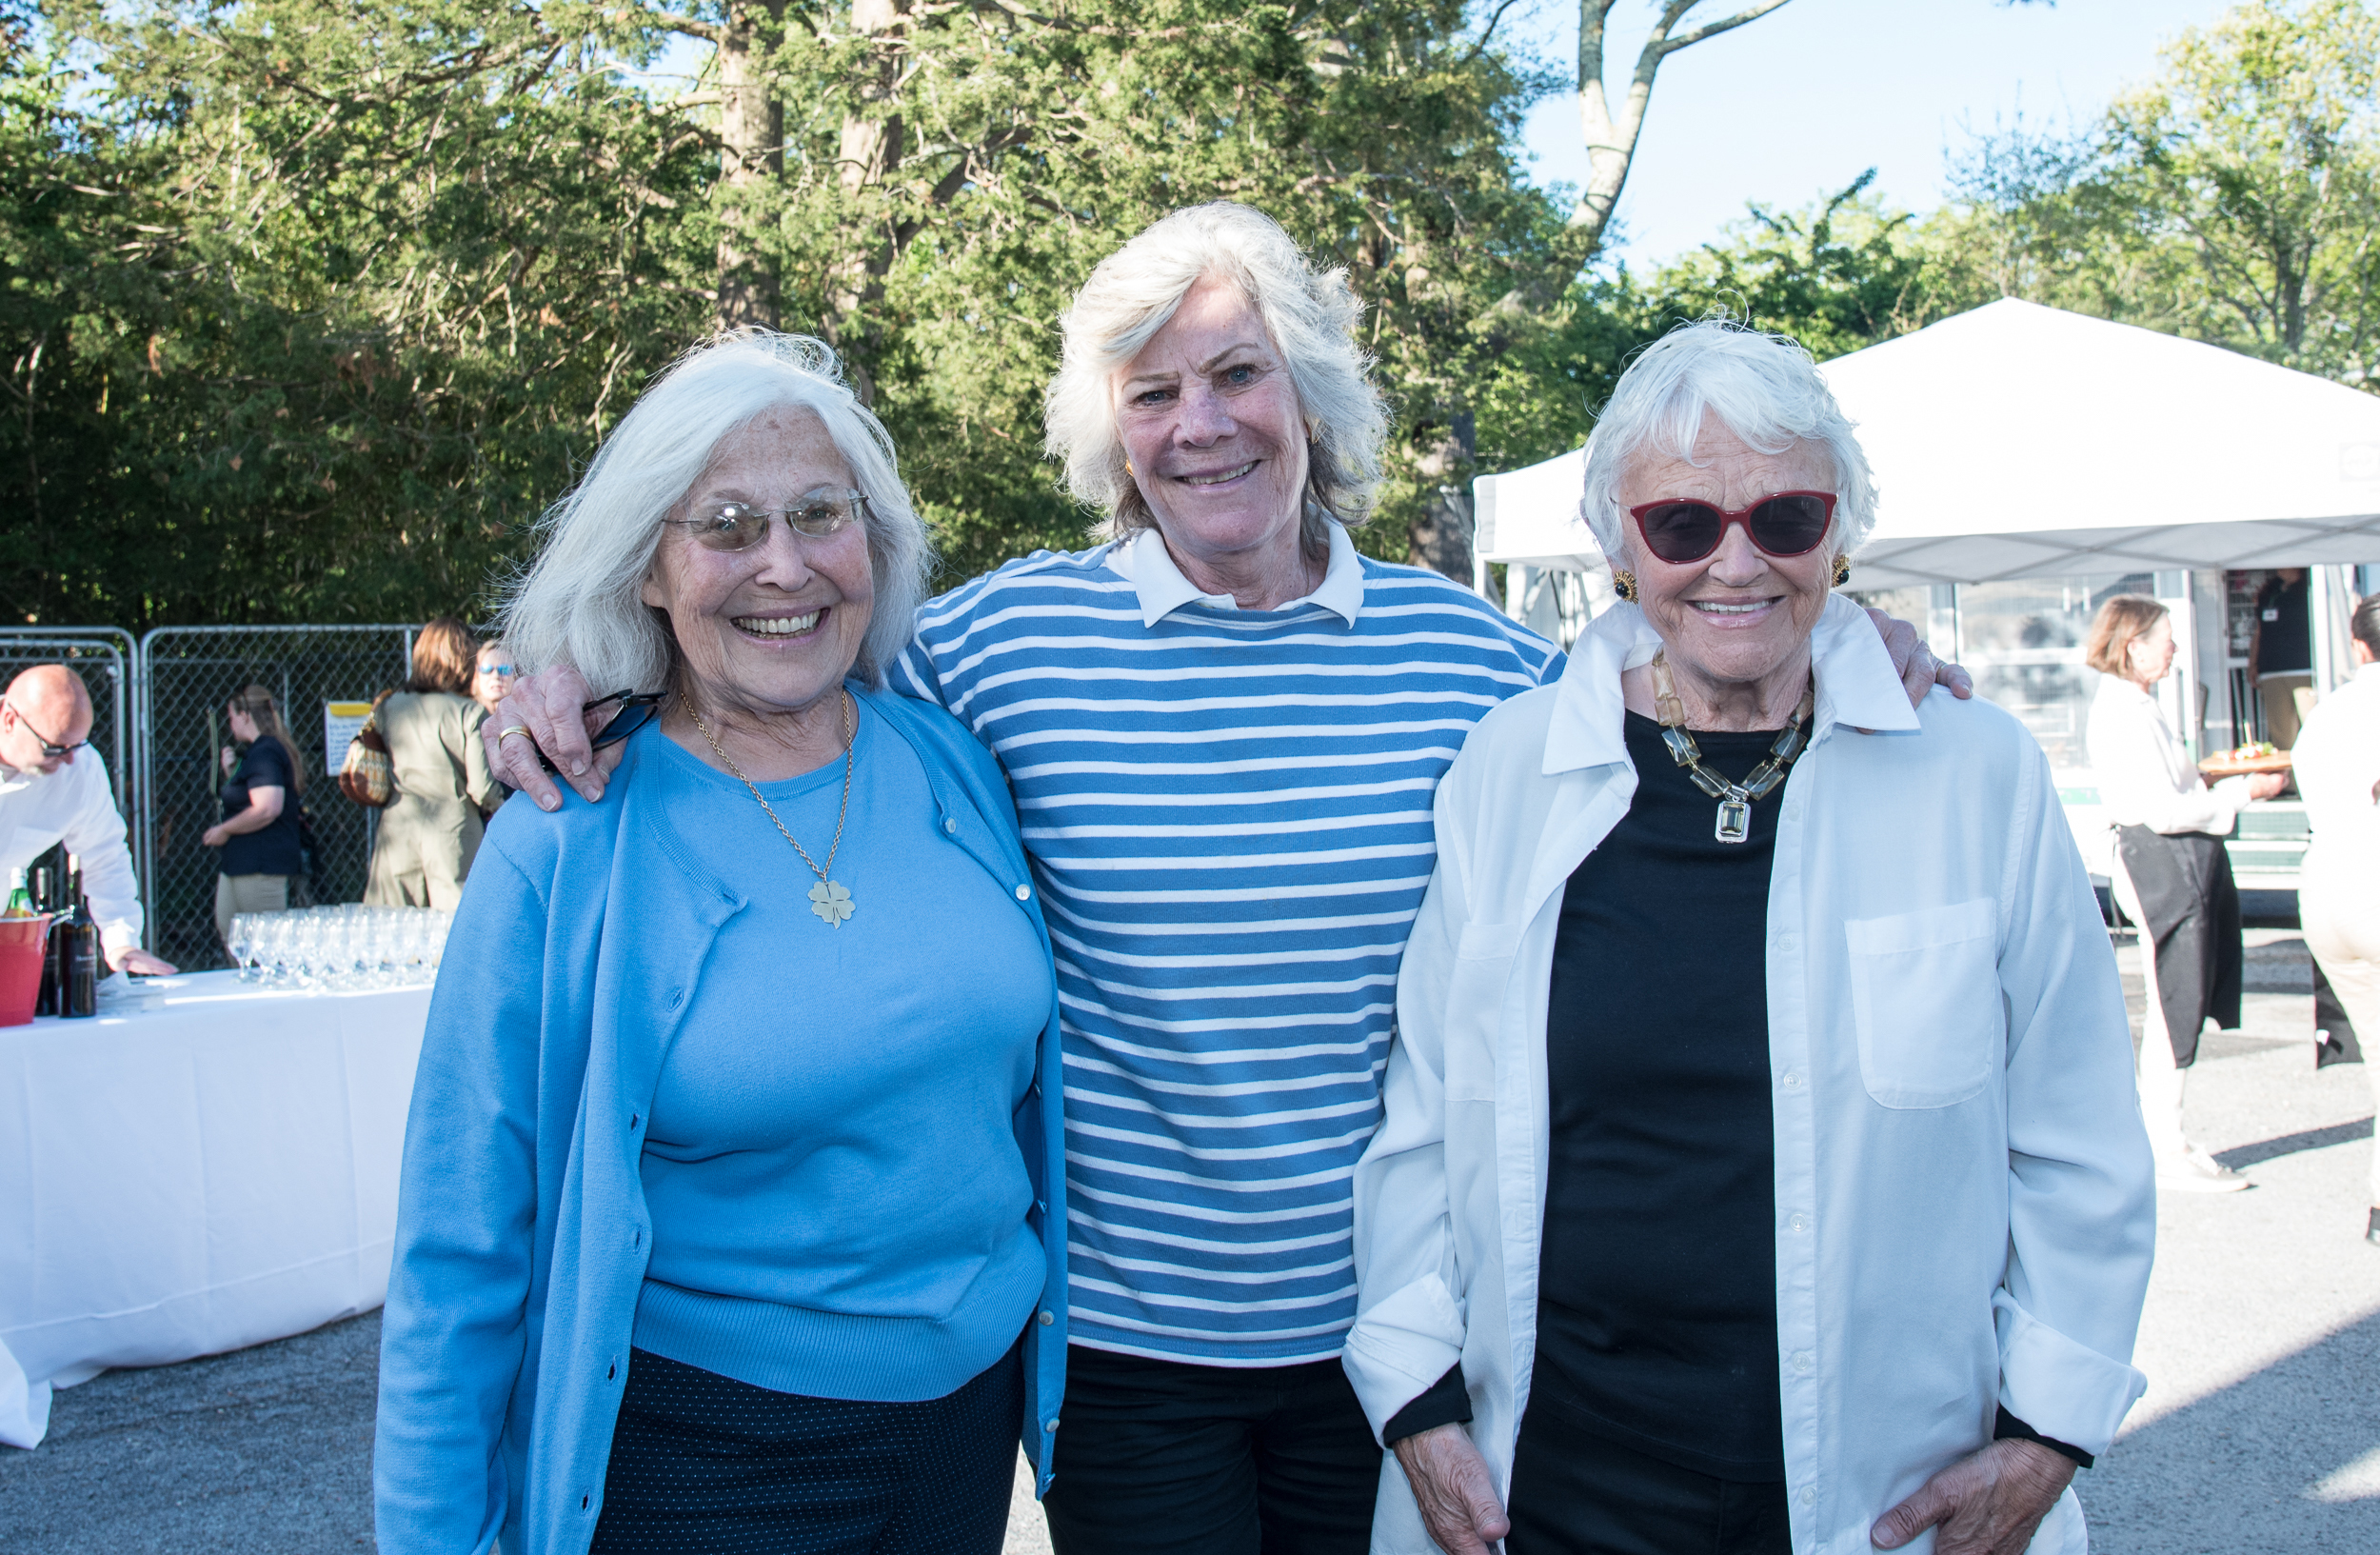 Susan Burke, Sandra Powers and Zoe Kamitses at the  Animal Rescue Fund of the Hamptons preview cocktail party for the benefit designer auction on Saturday evening at the ARF Thrift & Treasure Shop in Sagaponack. The online auction will run through June 7 and feature furniture and decorative items for the home donated by longstanding friends and ARF supporters, including some of the most admired designers, artisans, and dealers in the country.  LISA TAMBURINI